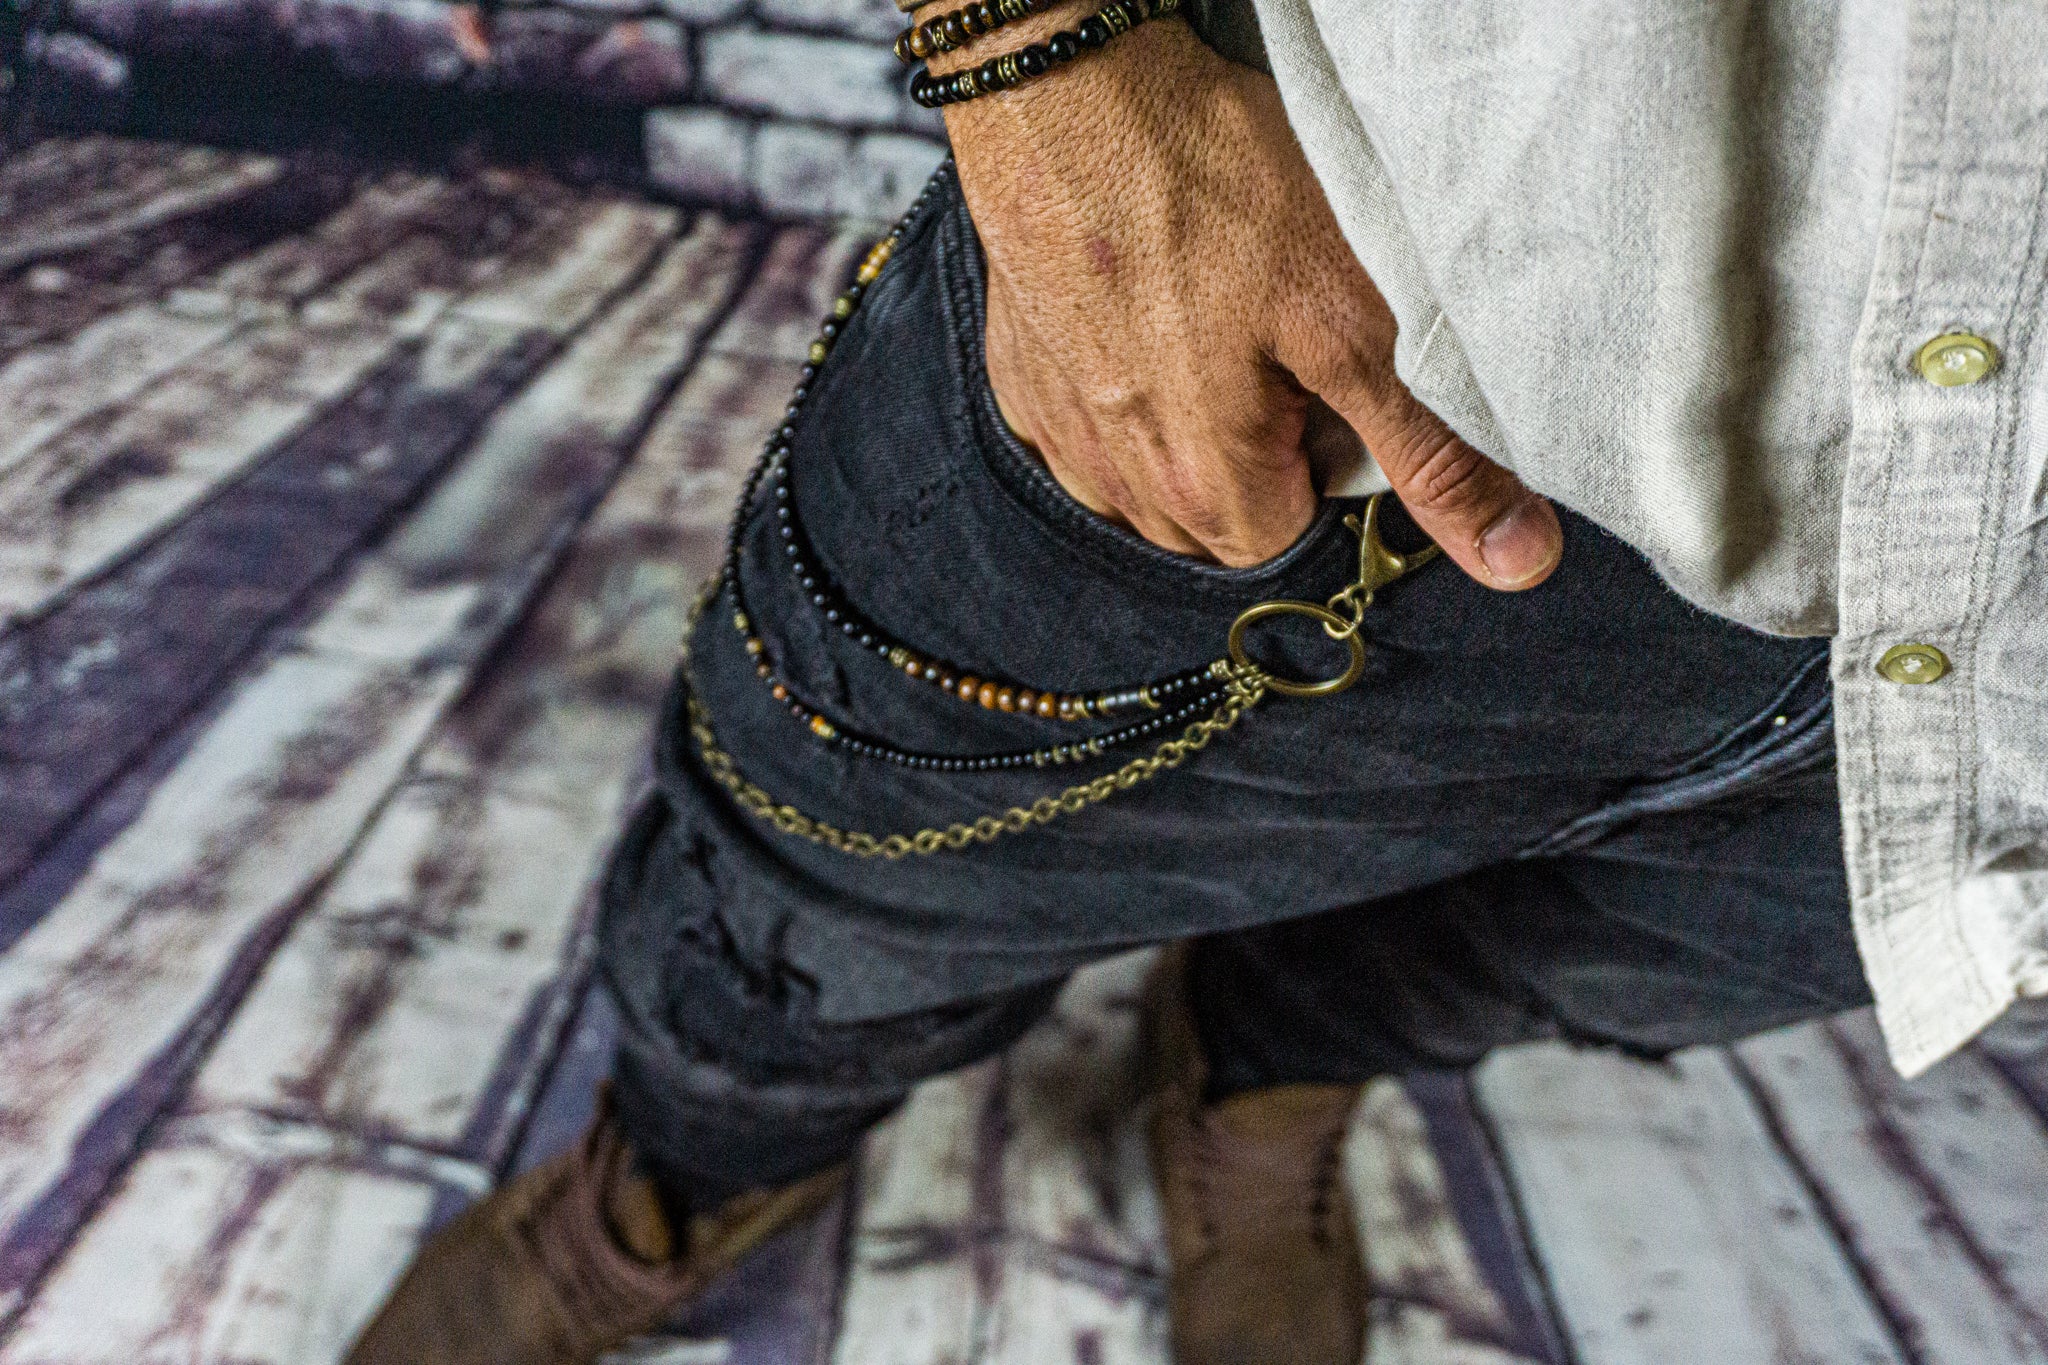 jeans wallet key chain multistrand made of onyx and tiger eye beads and a bronze chain